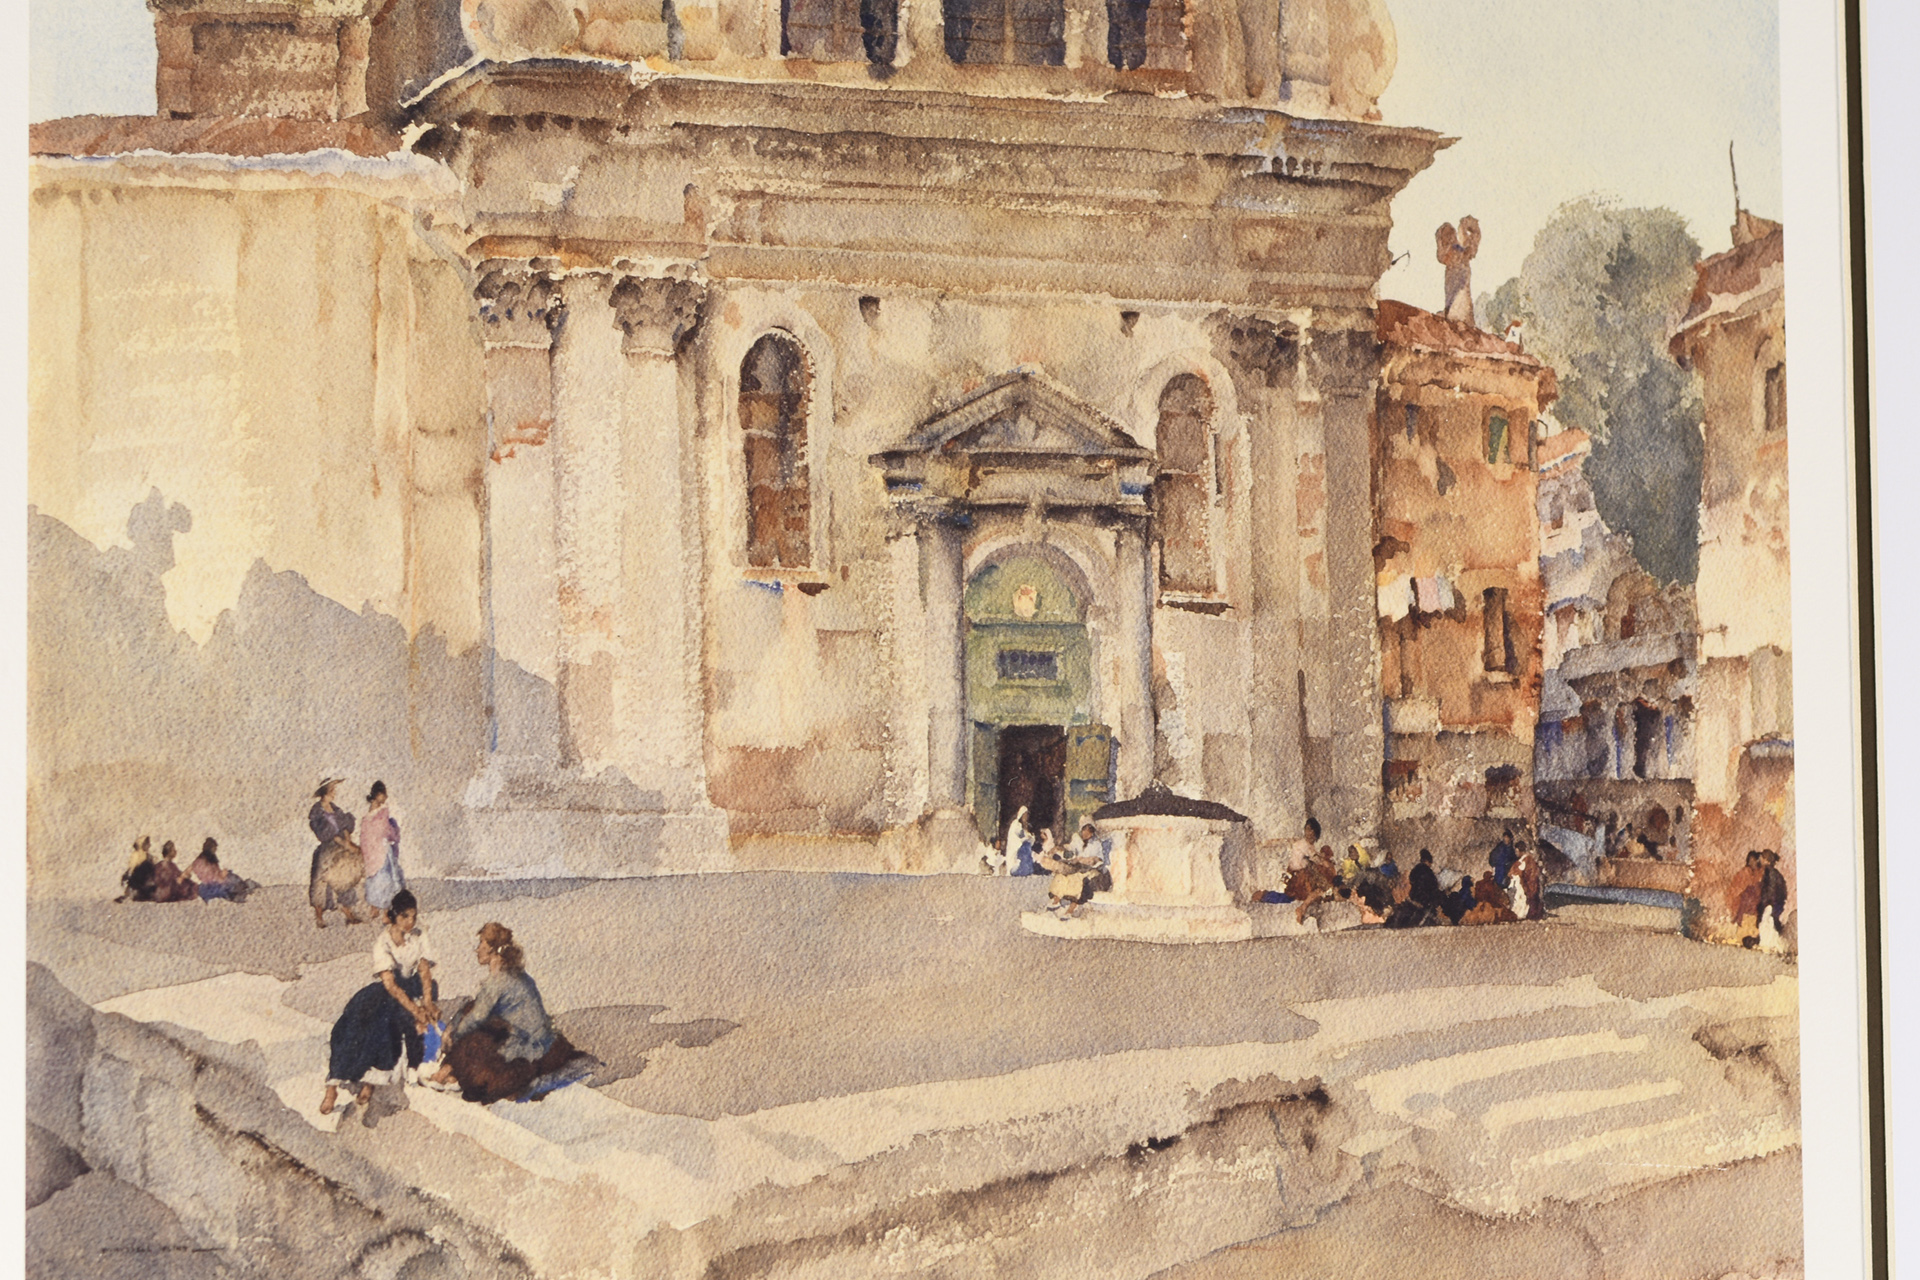 Sir Russell Flint Limited Edition "Campo San Trovaso, Venice" - Image 8 of 9